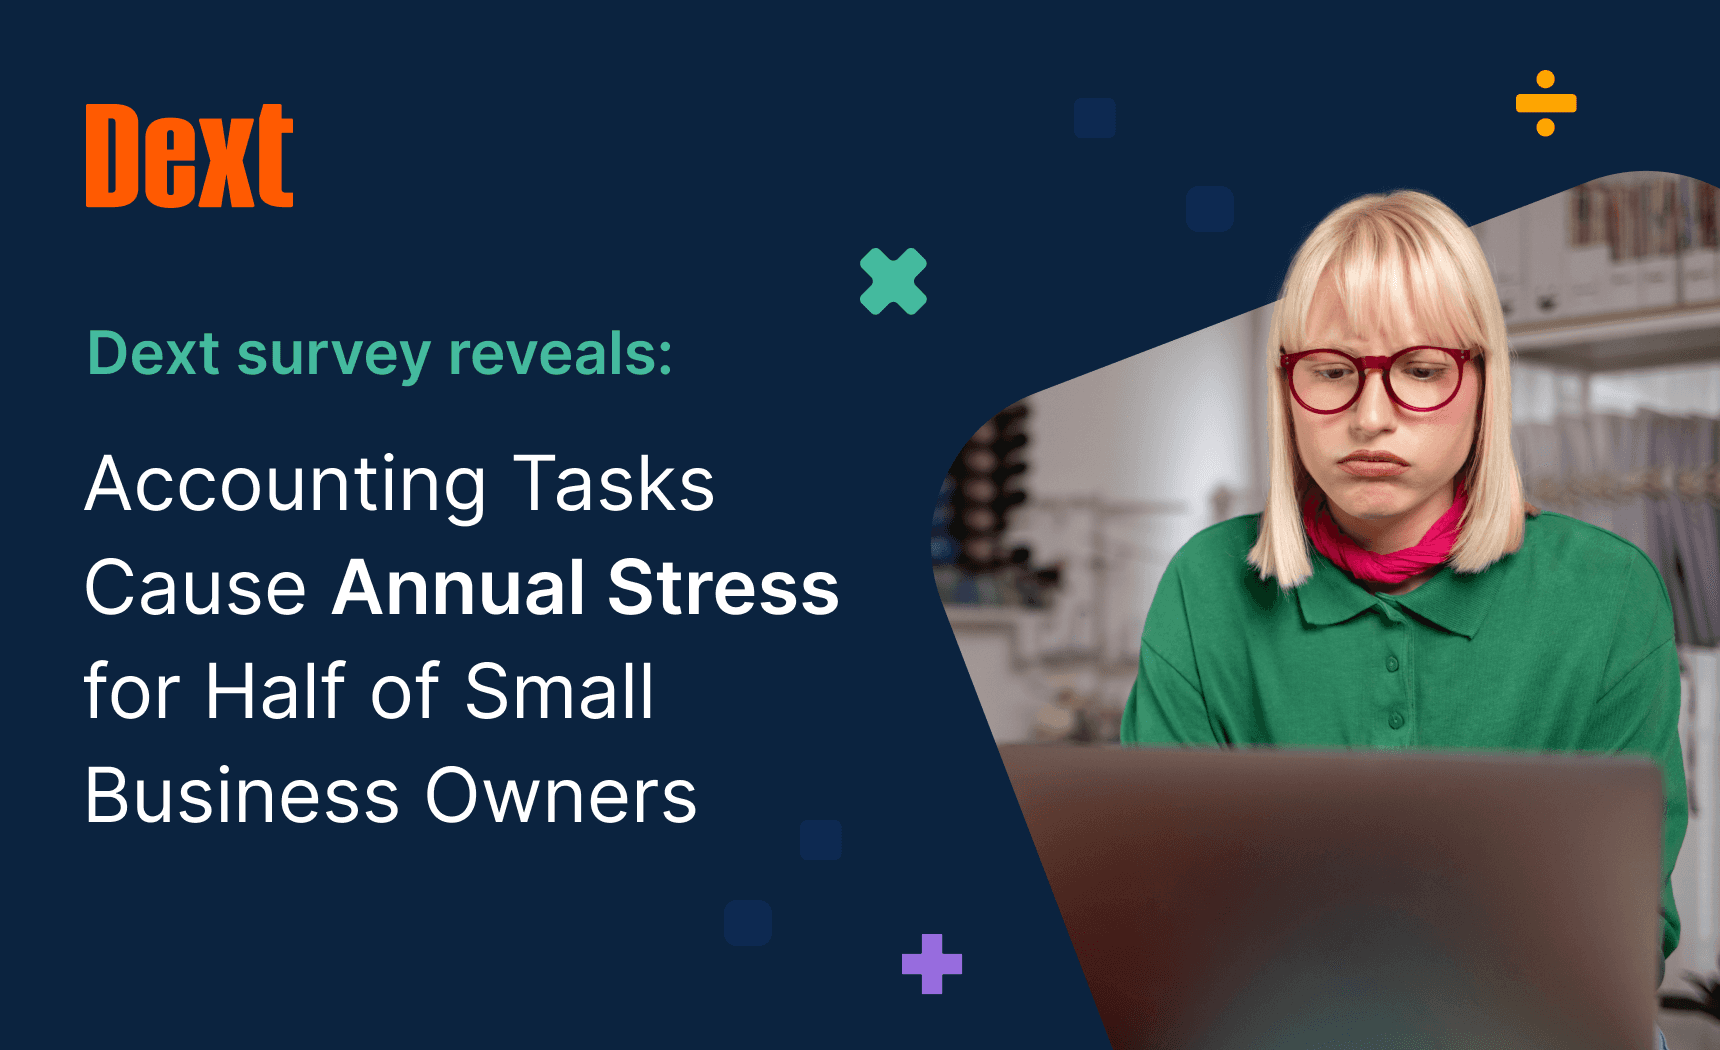 Accounting Tasks Cause Annual Stress for Half of Small Business Owners